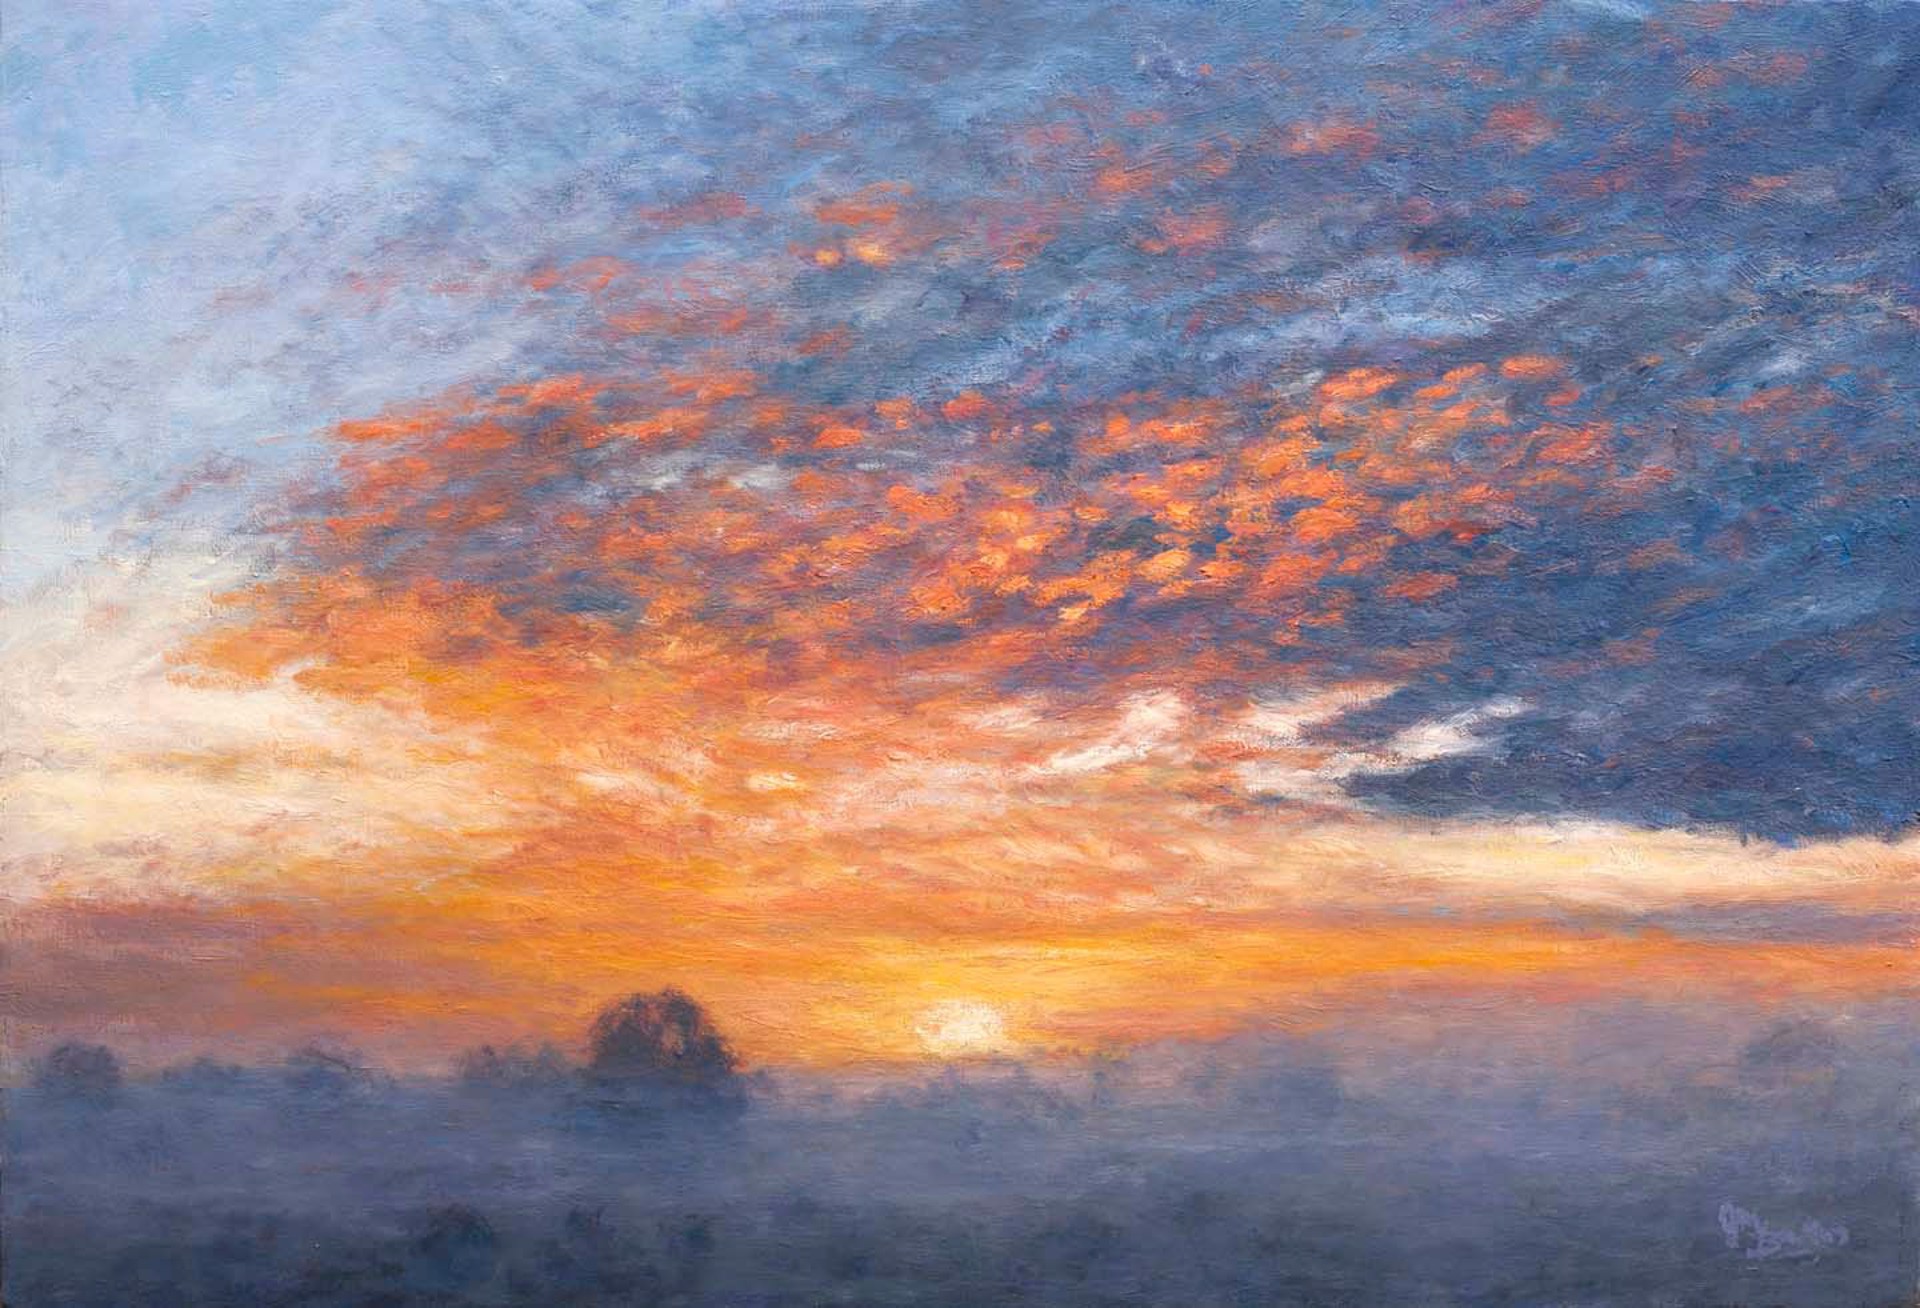 Ground Fog and Cloud Embers by Gary Bowling